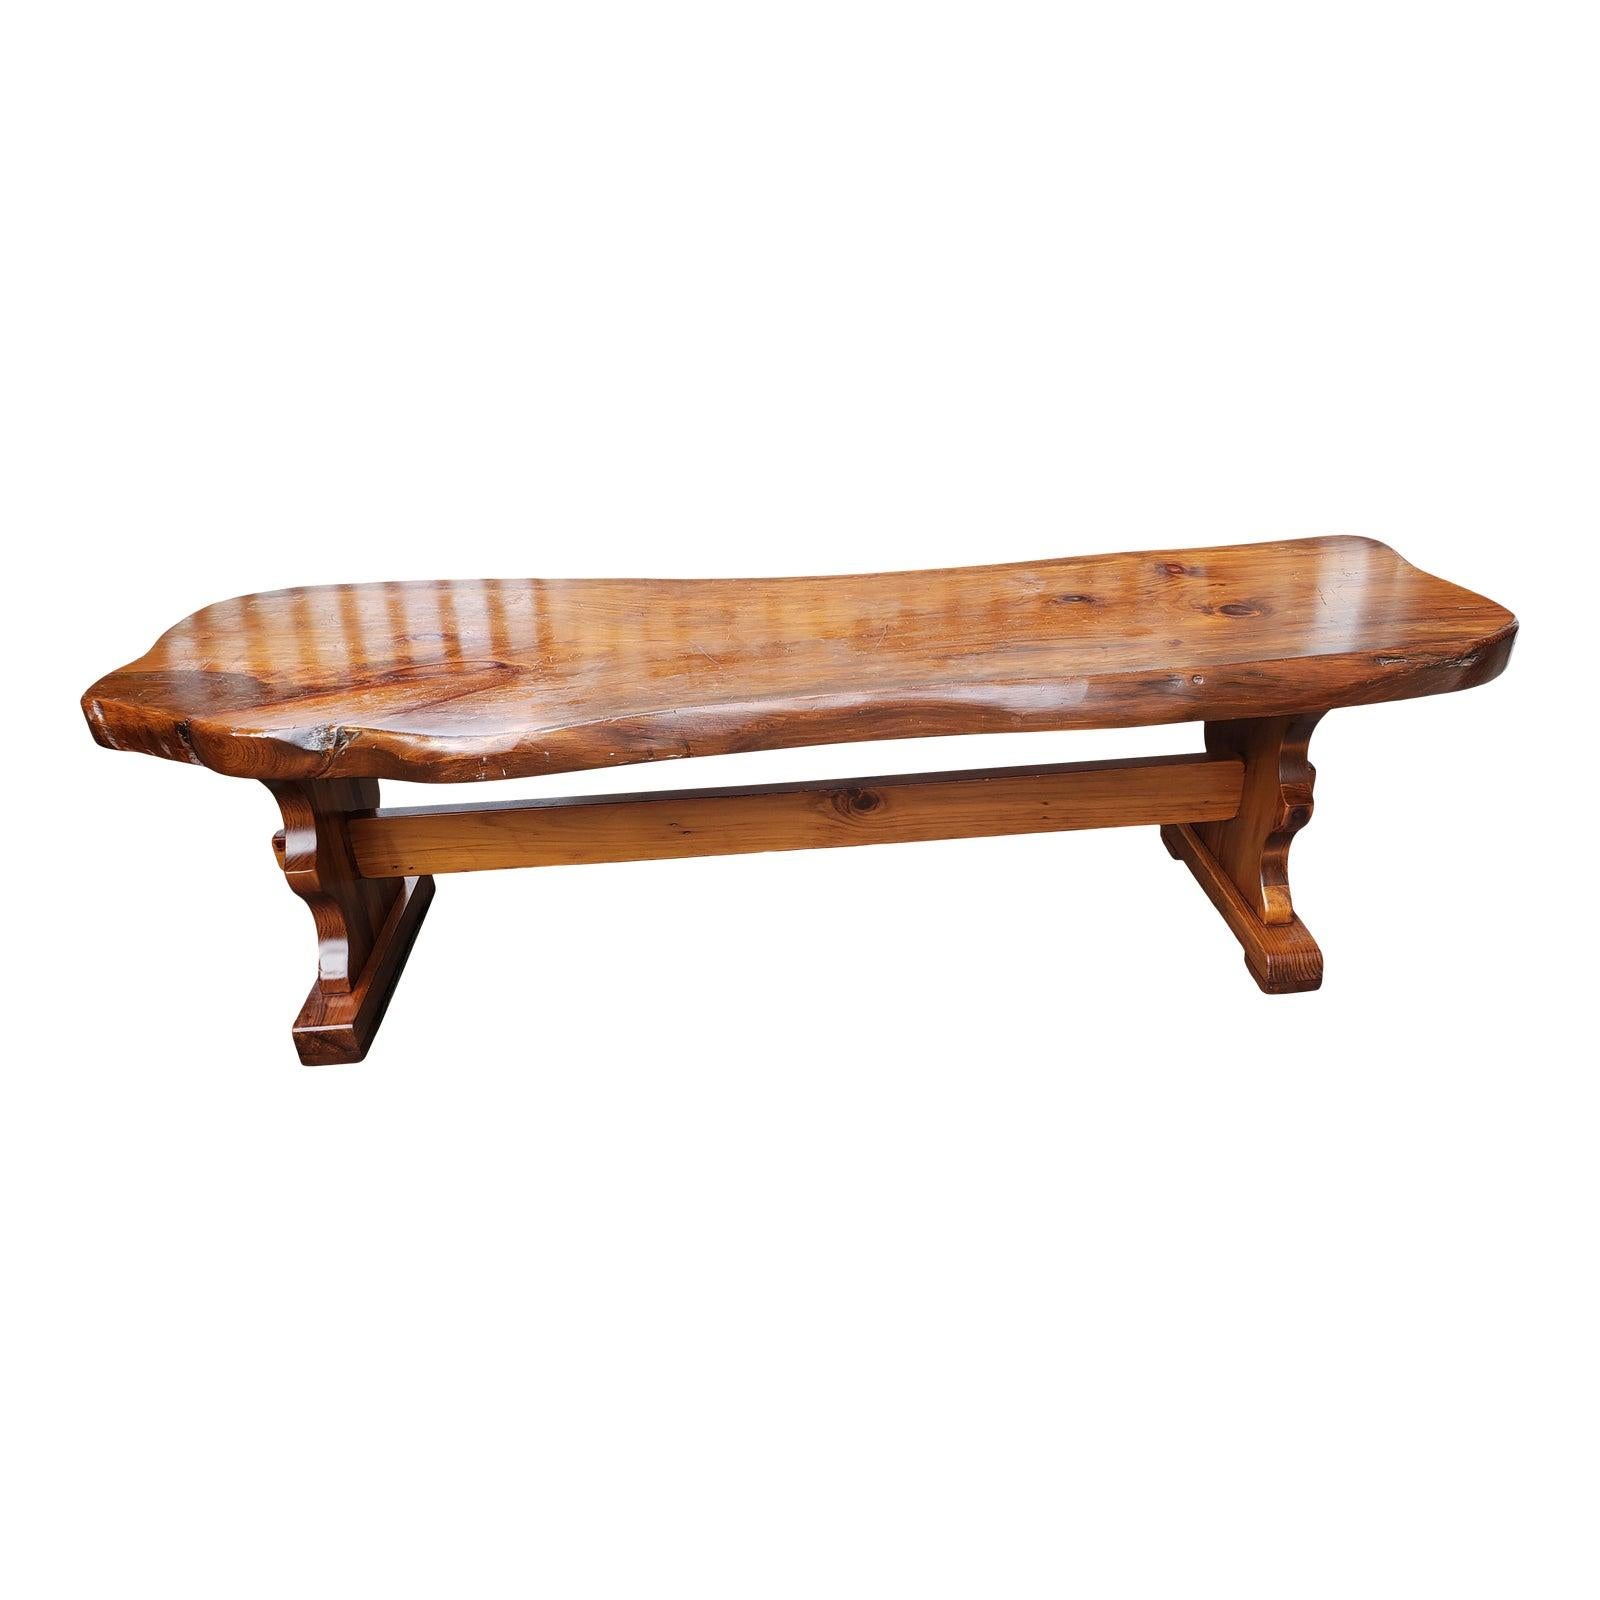 1980s Handcrafted Polished Walnut Pine Wood Slabs Trestle Coffee Table For Sale